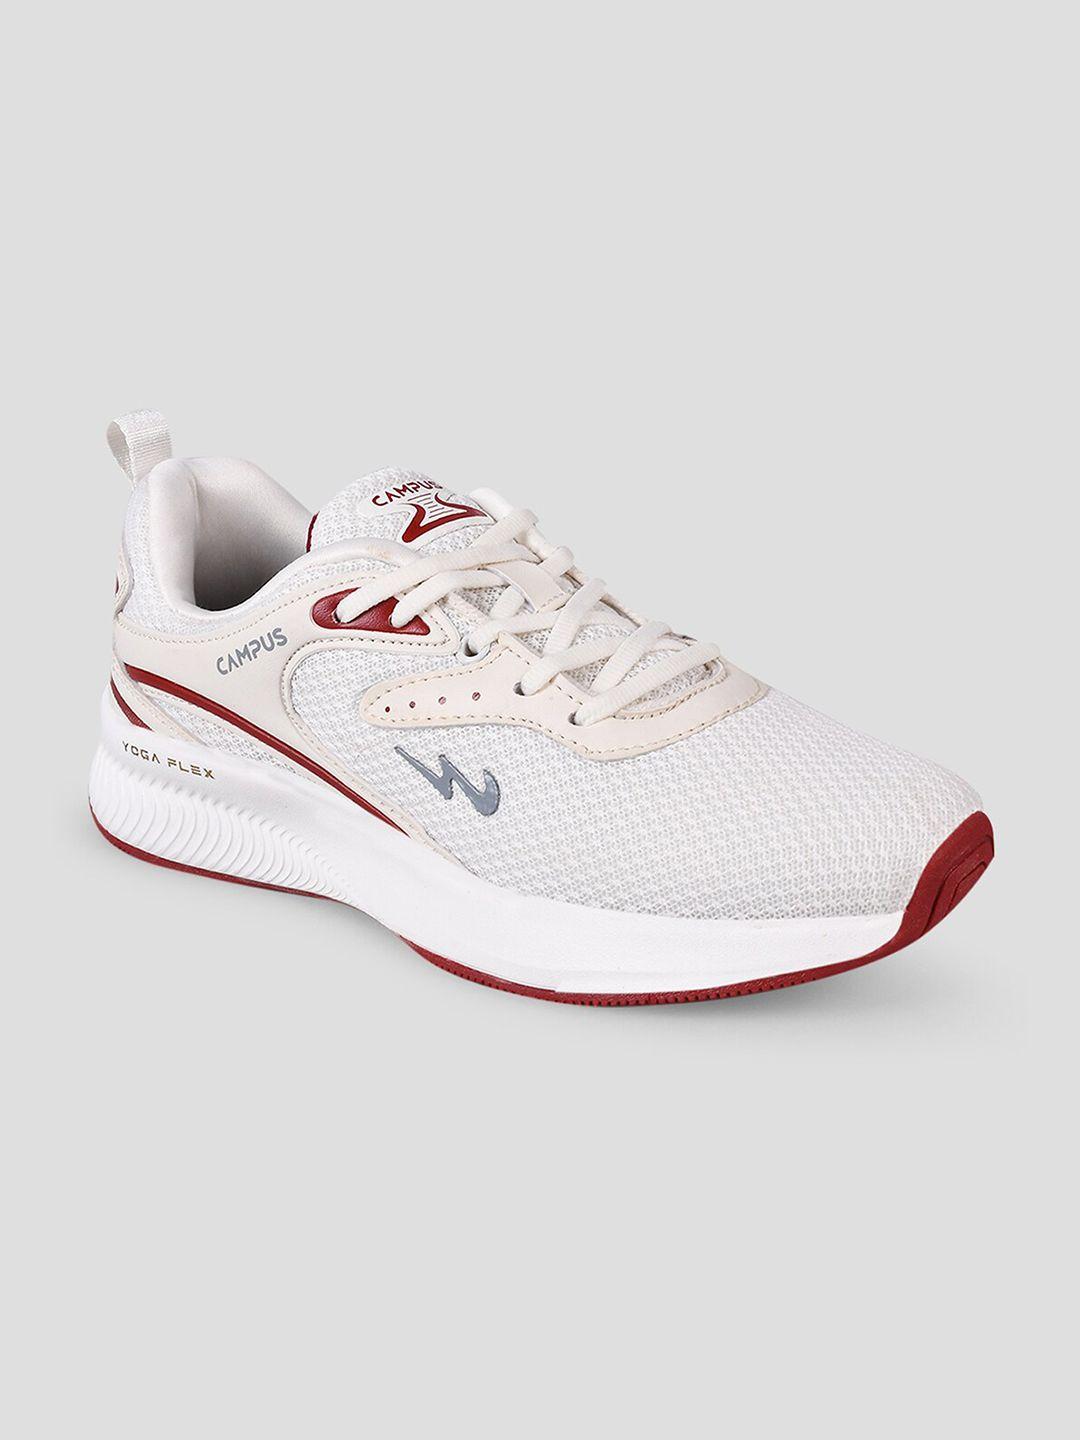 Campus Women Off White & Maroon Lace-Ups Mesh Running Shoes